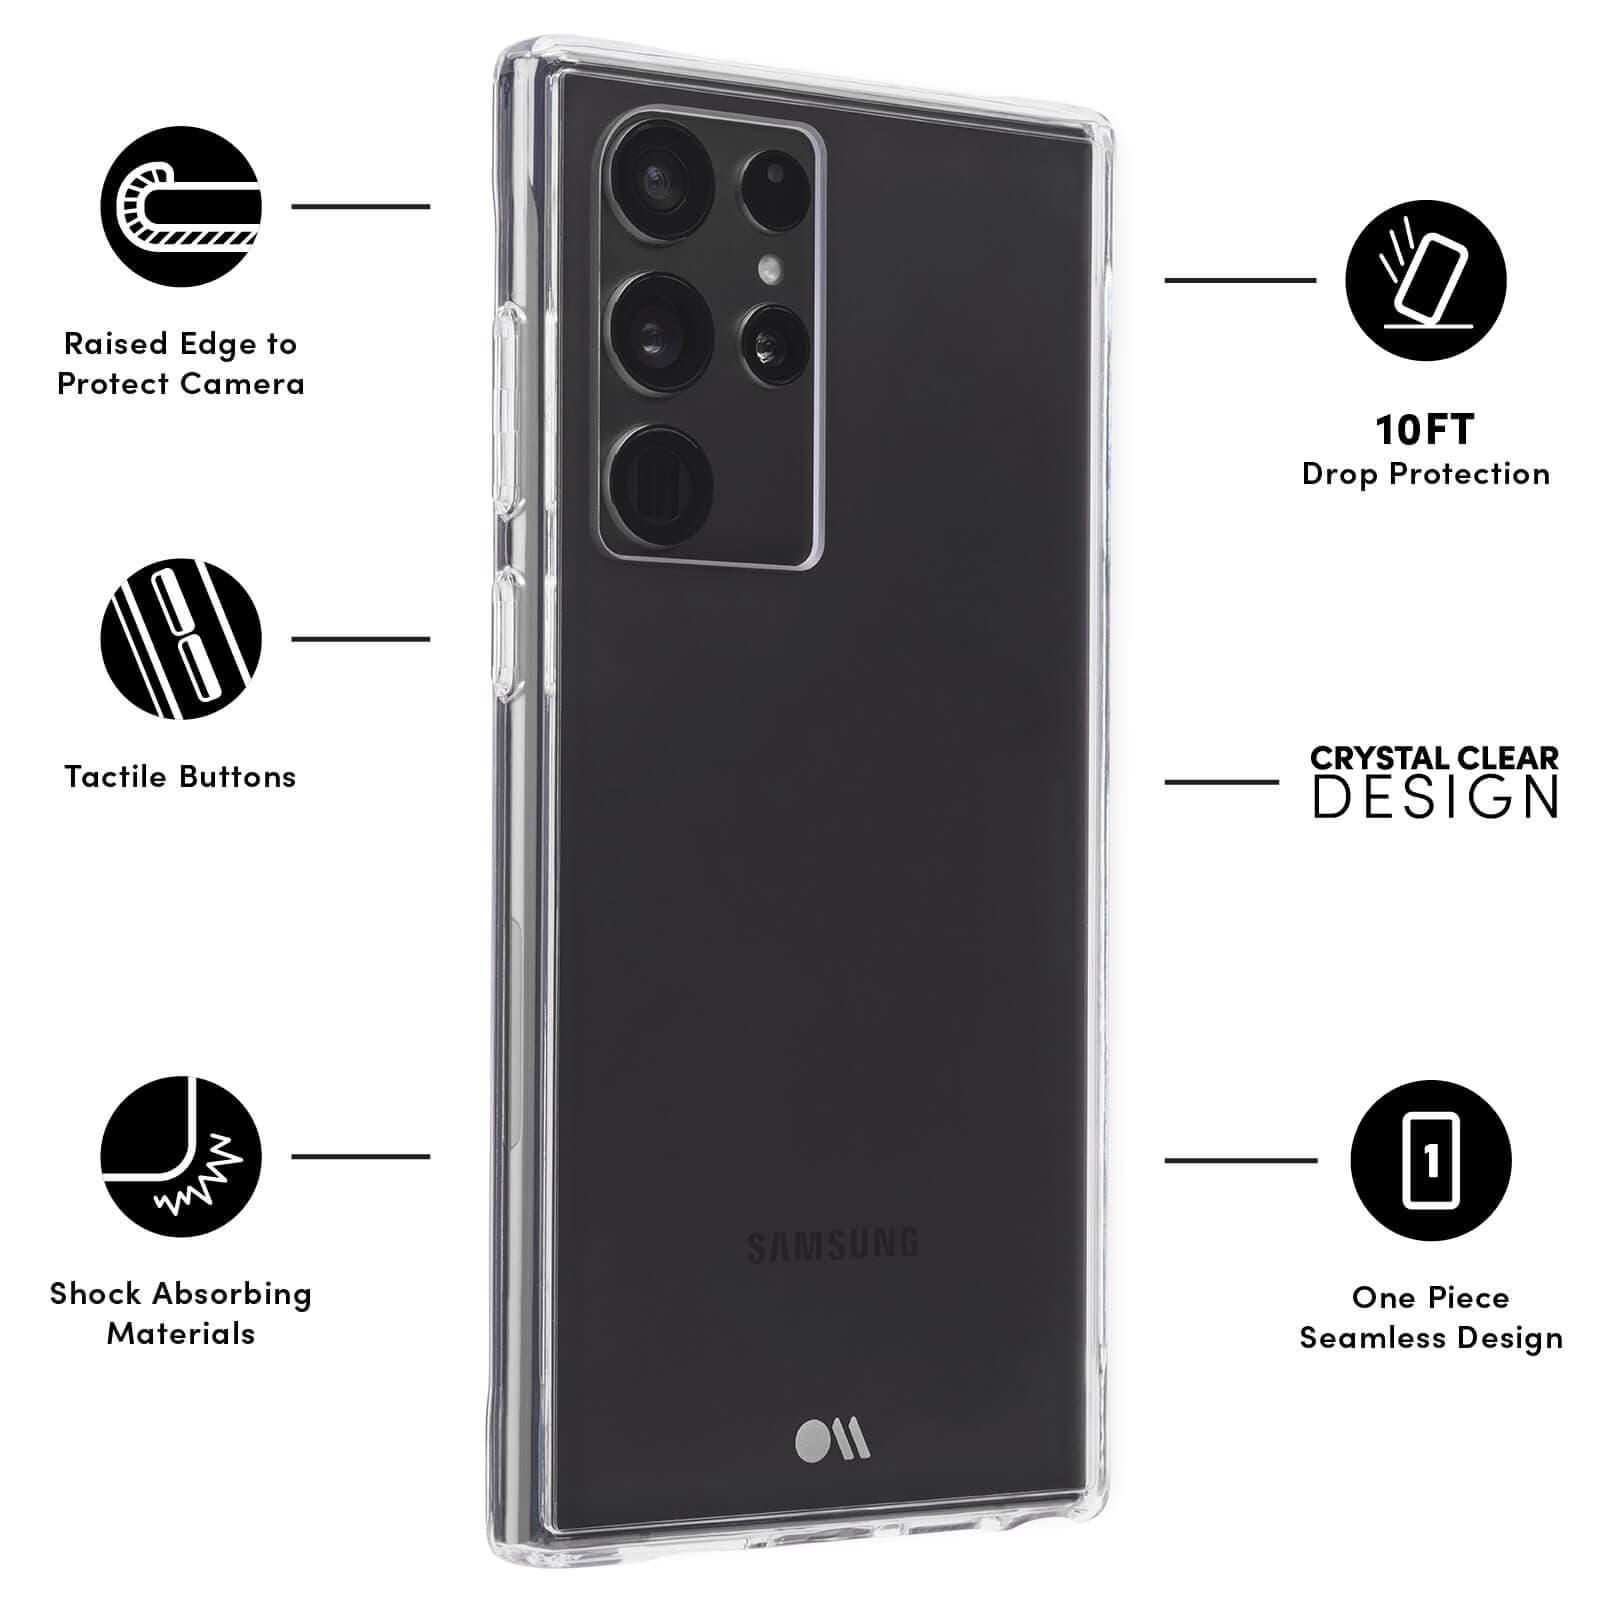 RAISED EDGE TO PROTECT CAMERA, TACTILE BUTTONS, SHOCK ABSORBING MATERIALS, 10FT DROP PROTECTION, CRYSTAL CLEAR DESIGN, ONE PIECE SEAMLESS DESIGN. COLOR::CLEAR